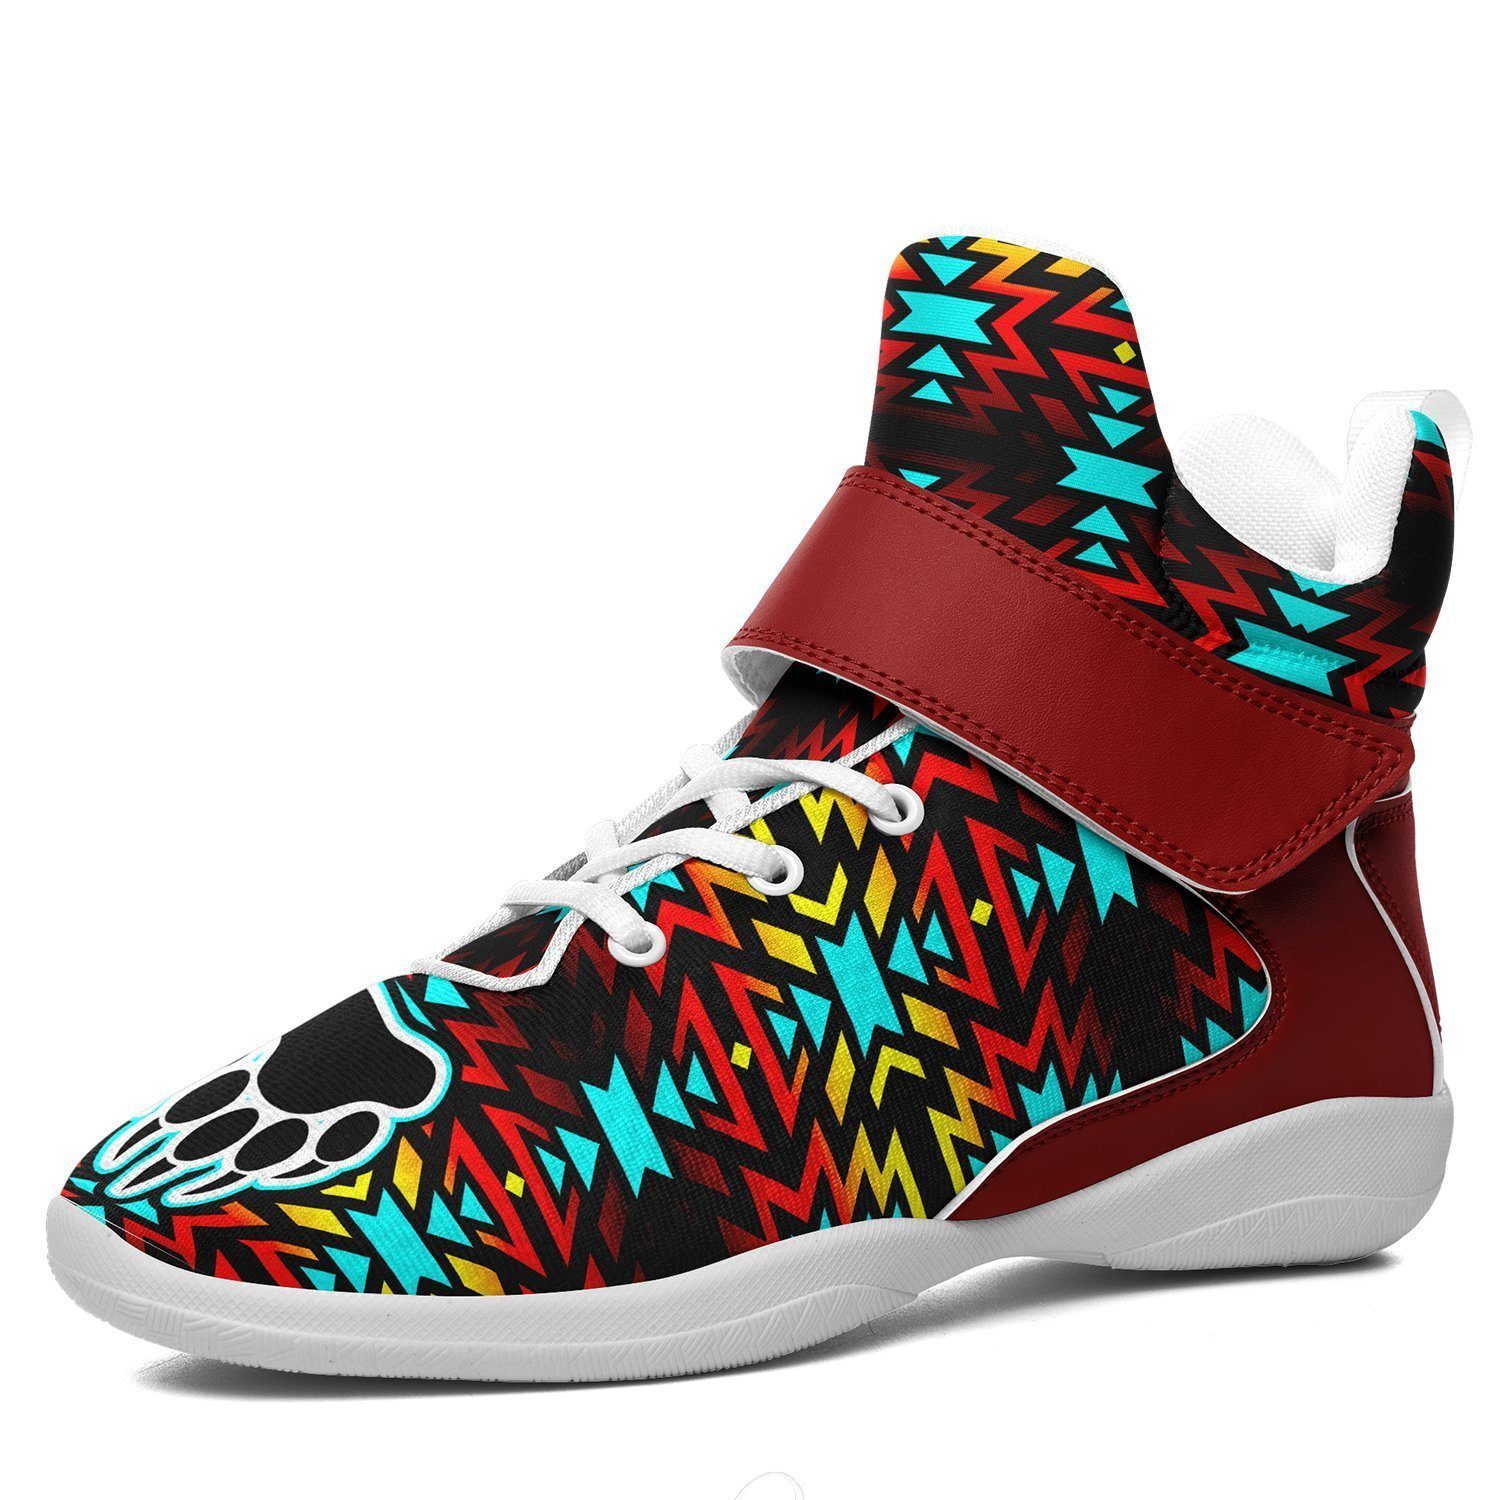 Fire Colors and Turquoise Bearpaw Ipottaa Basketball / Sport High Top Shoes - White Sole 49 Dzine US Men 7 / EUR 40 White Sole with Dark Red Strap 